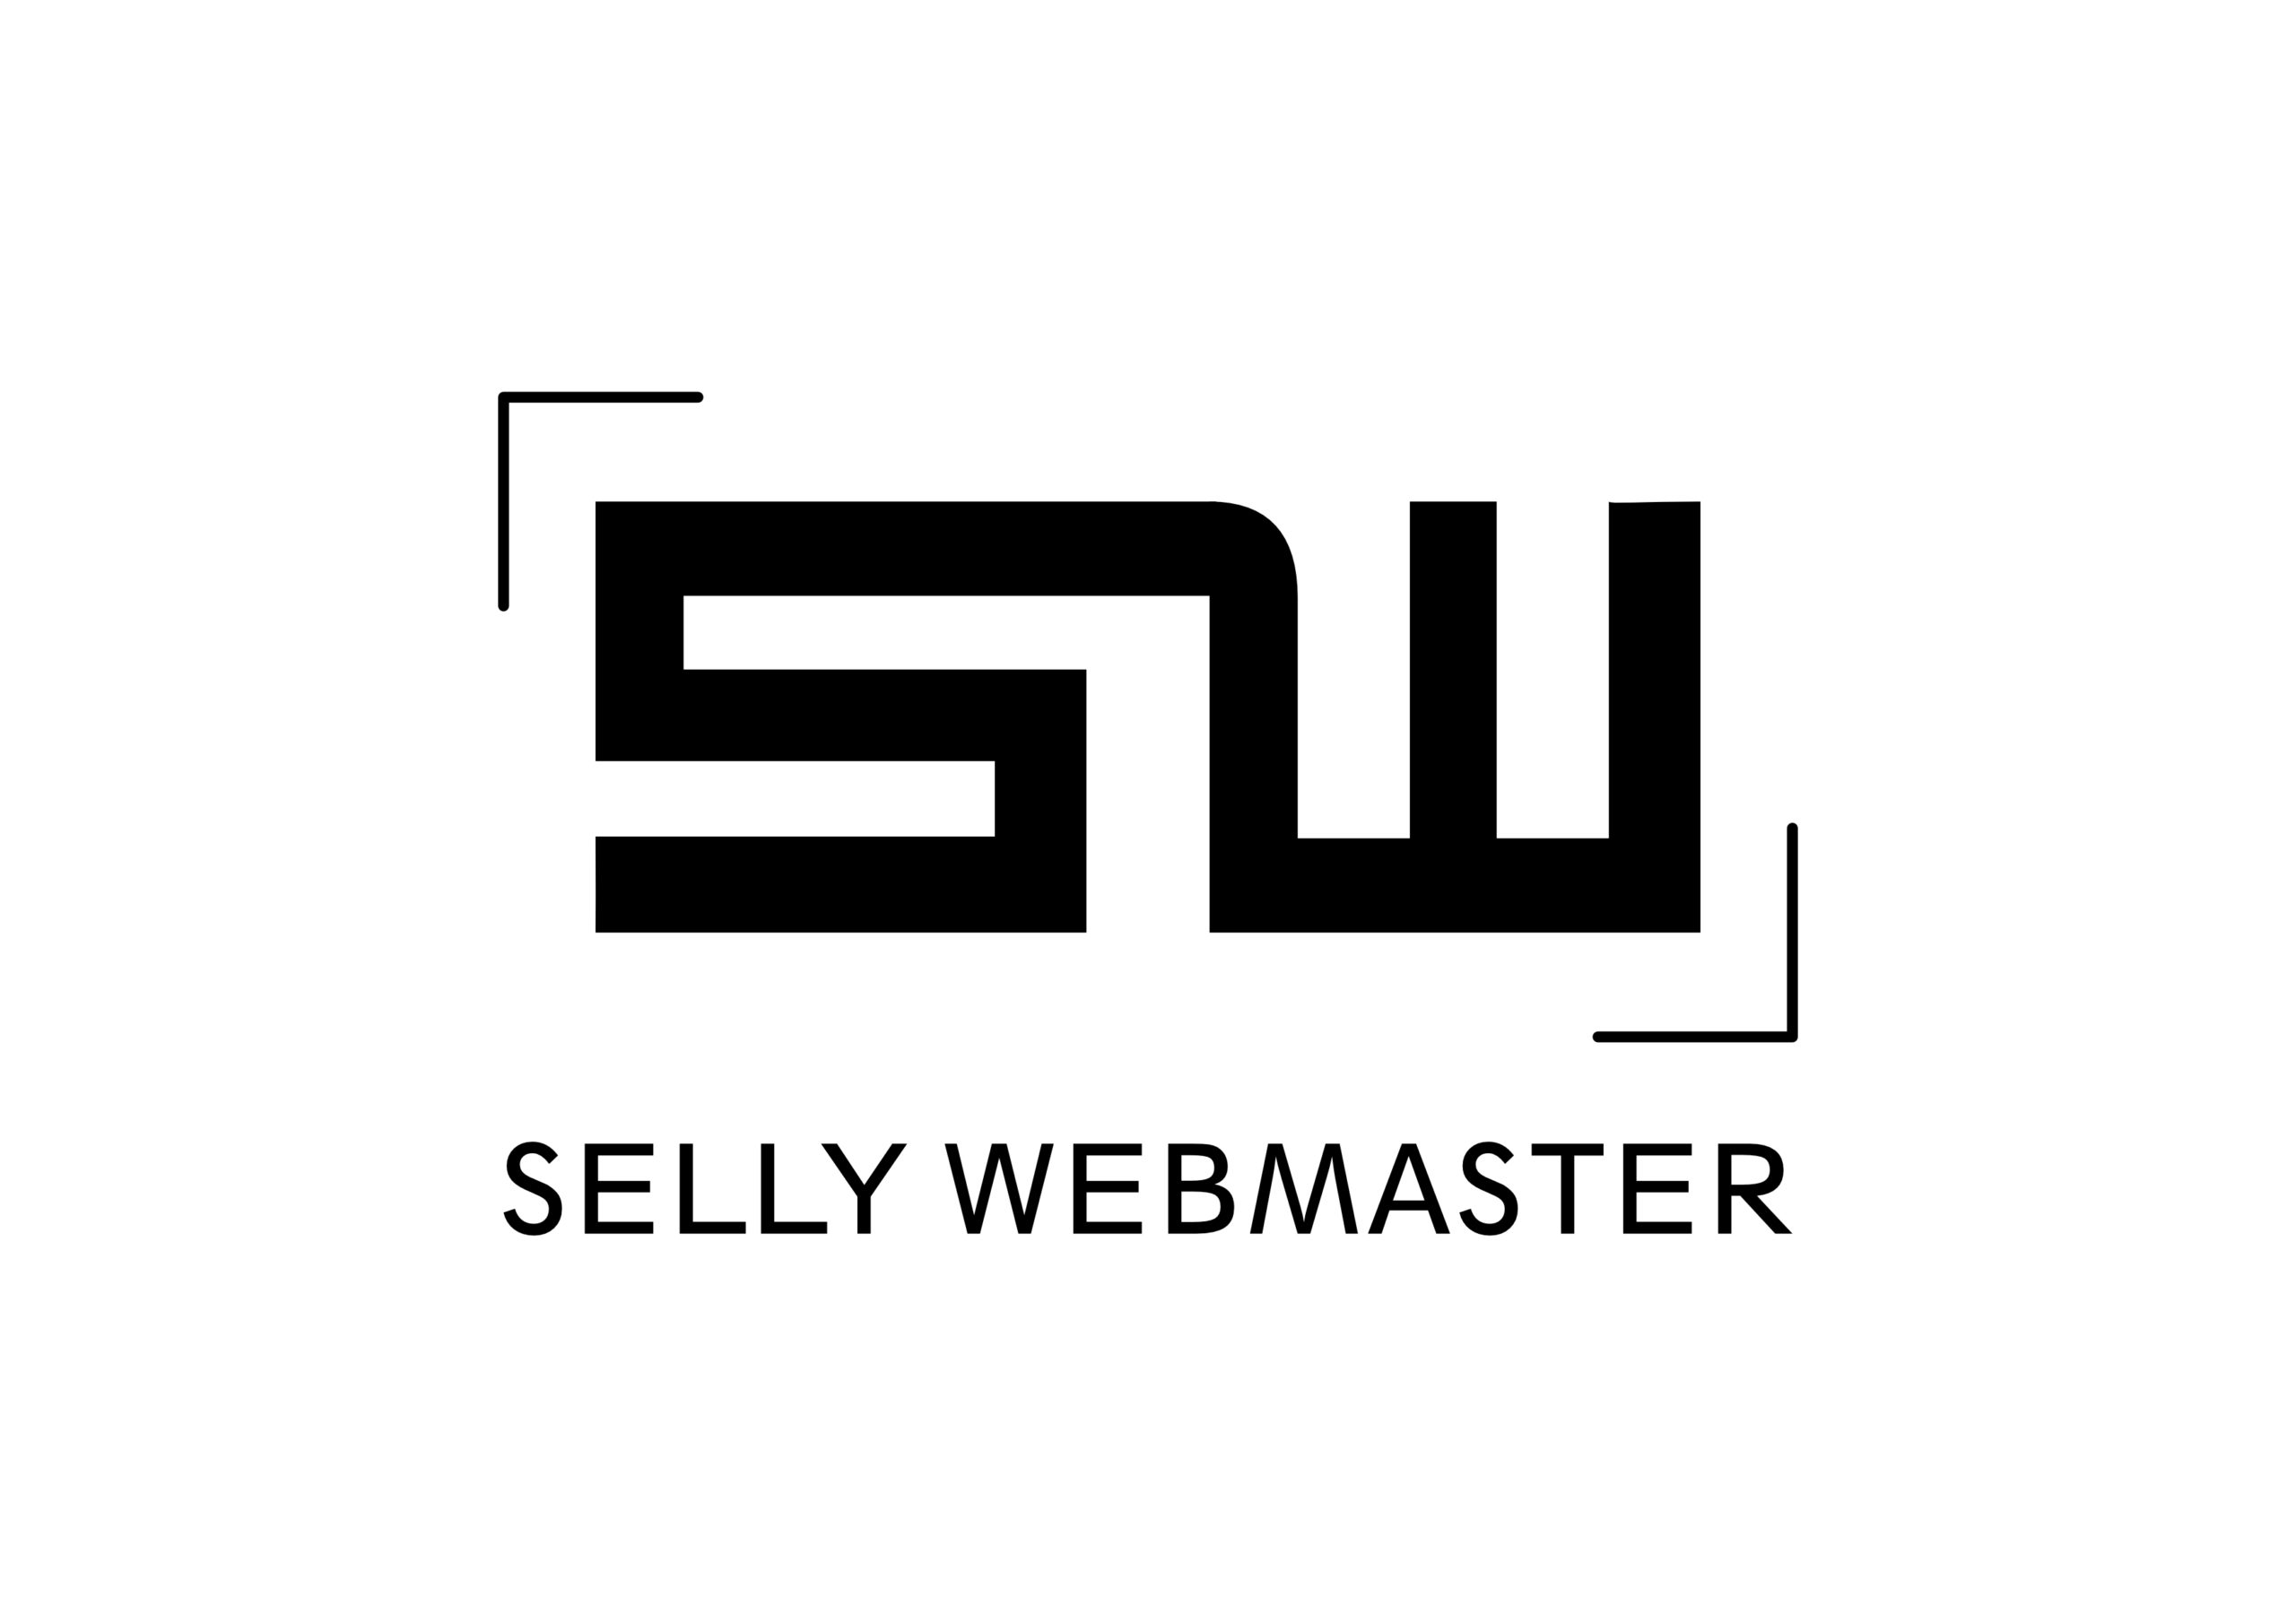 Selly Webmaster